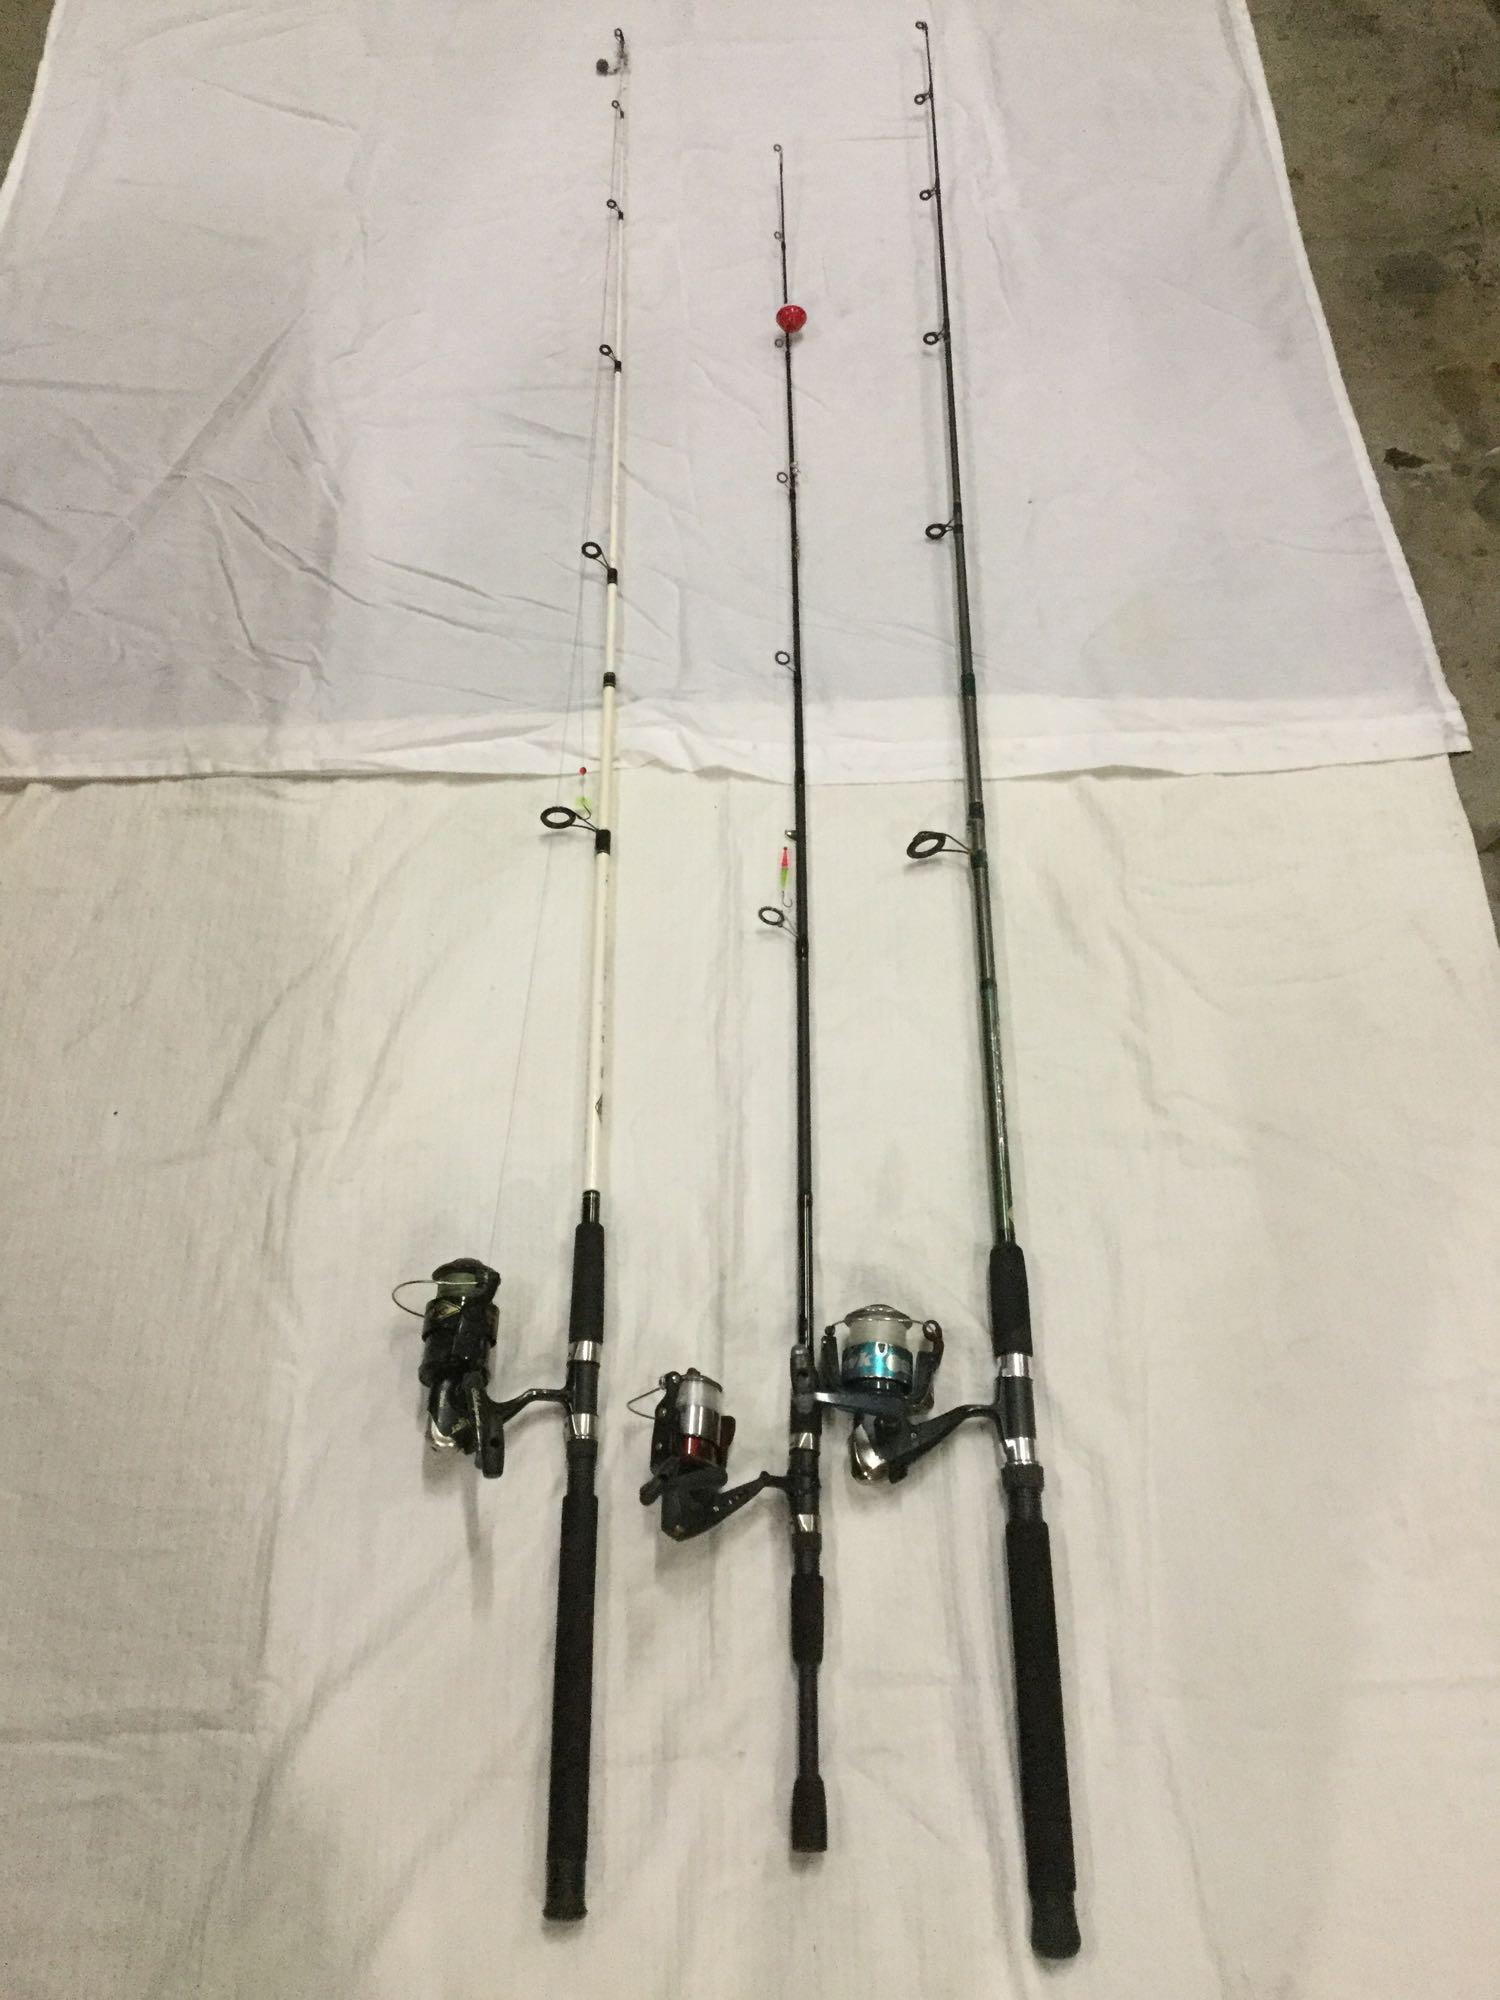 At Auction: Group of 5 Vintage Fishing Rods with Cases